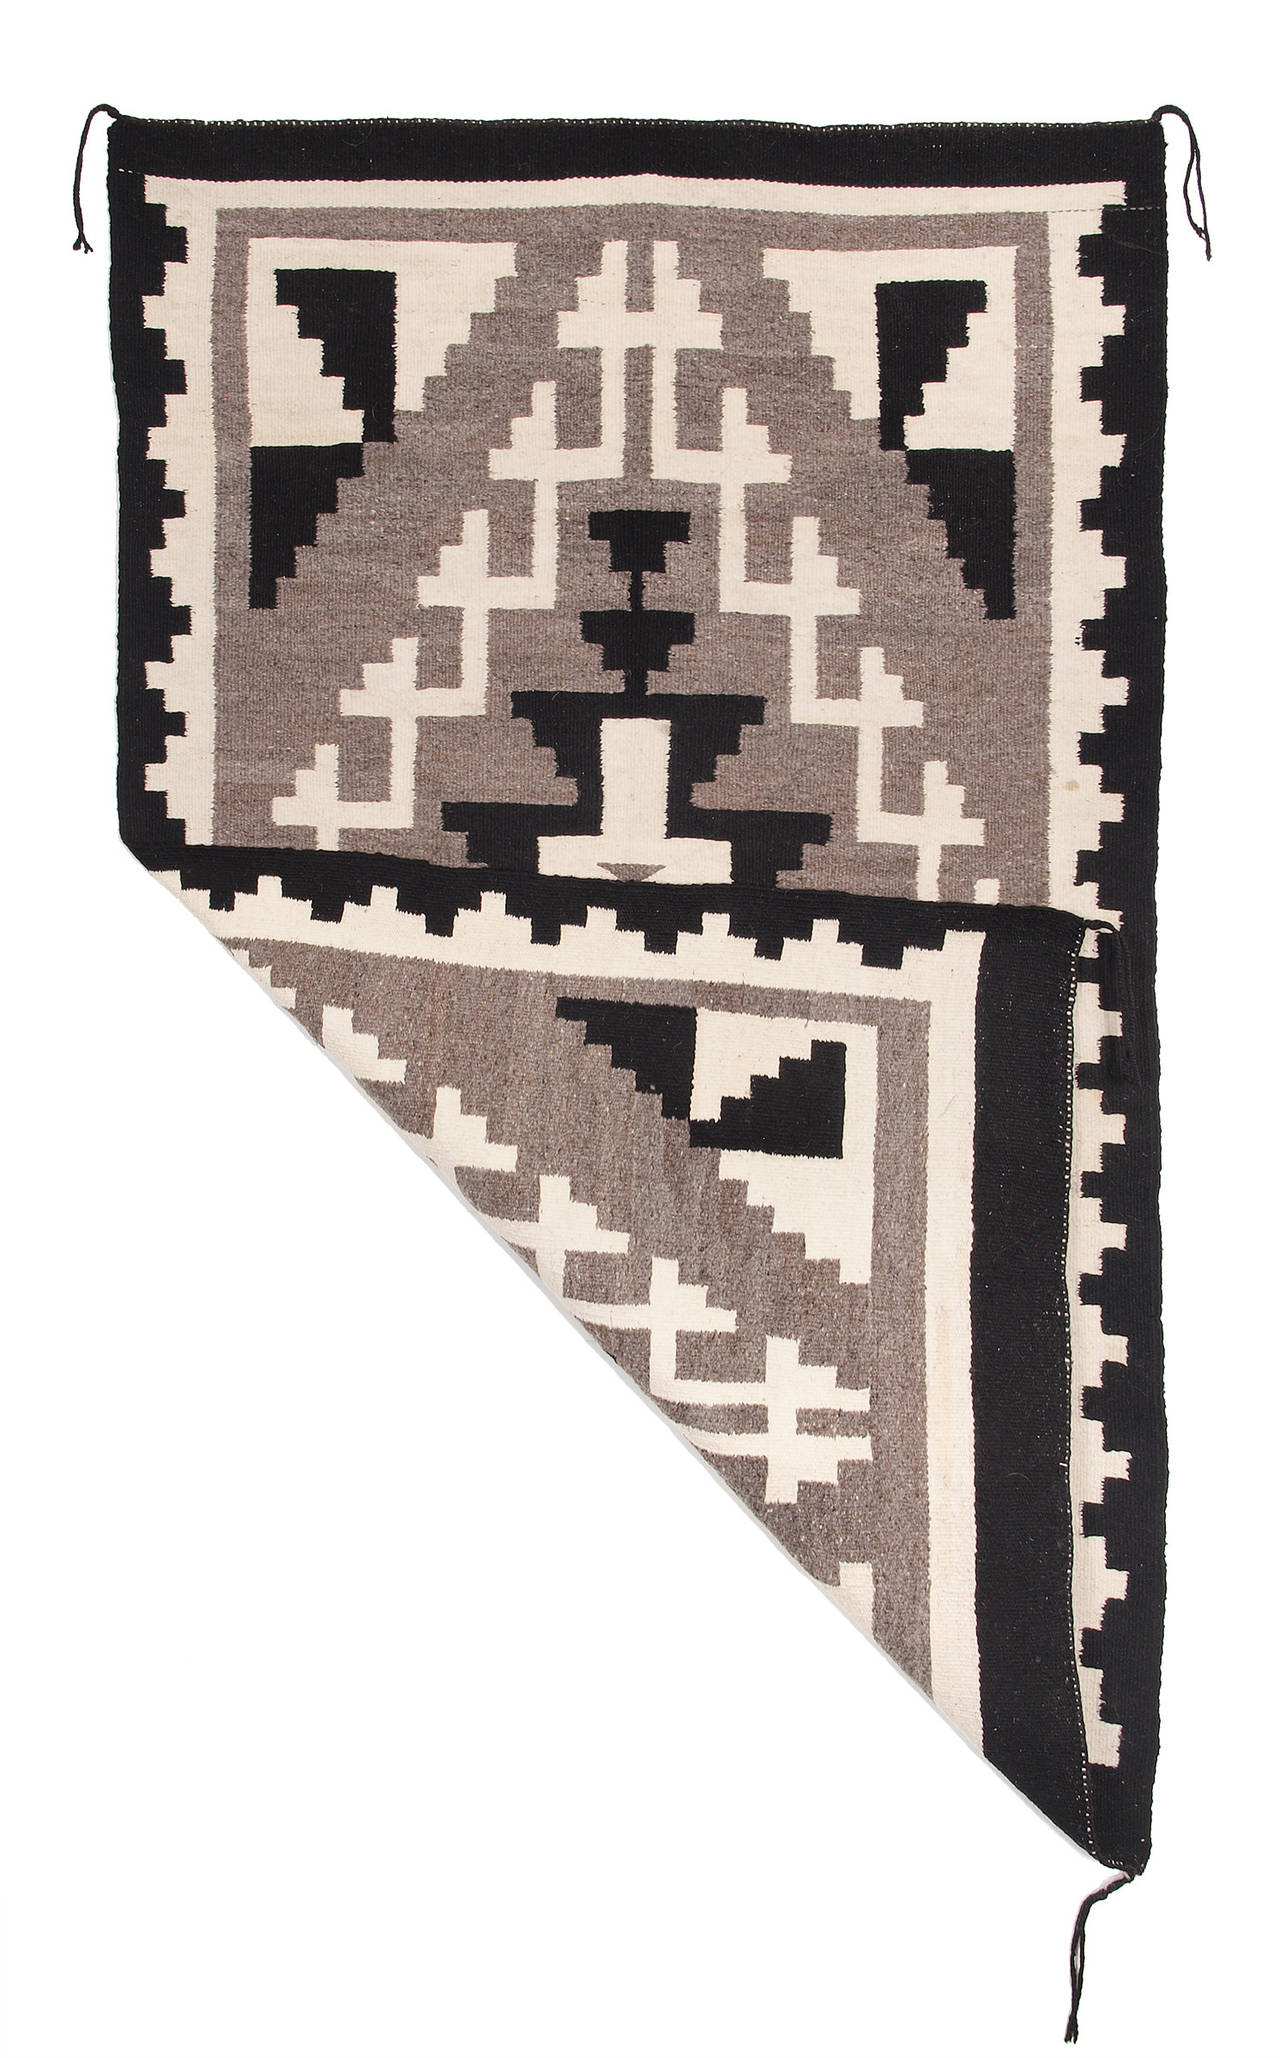 A pan-reservation or trading post rug woven by a Navajo artist circa 1950 in natural ivory, gray and black fleece. A traditional geometric and hooked design with a beautiful variegation in the gray background.

This textile is well suited for use